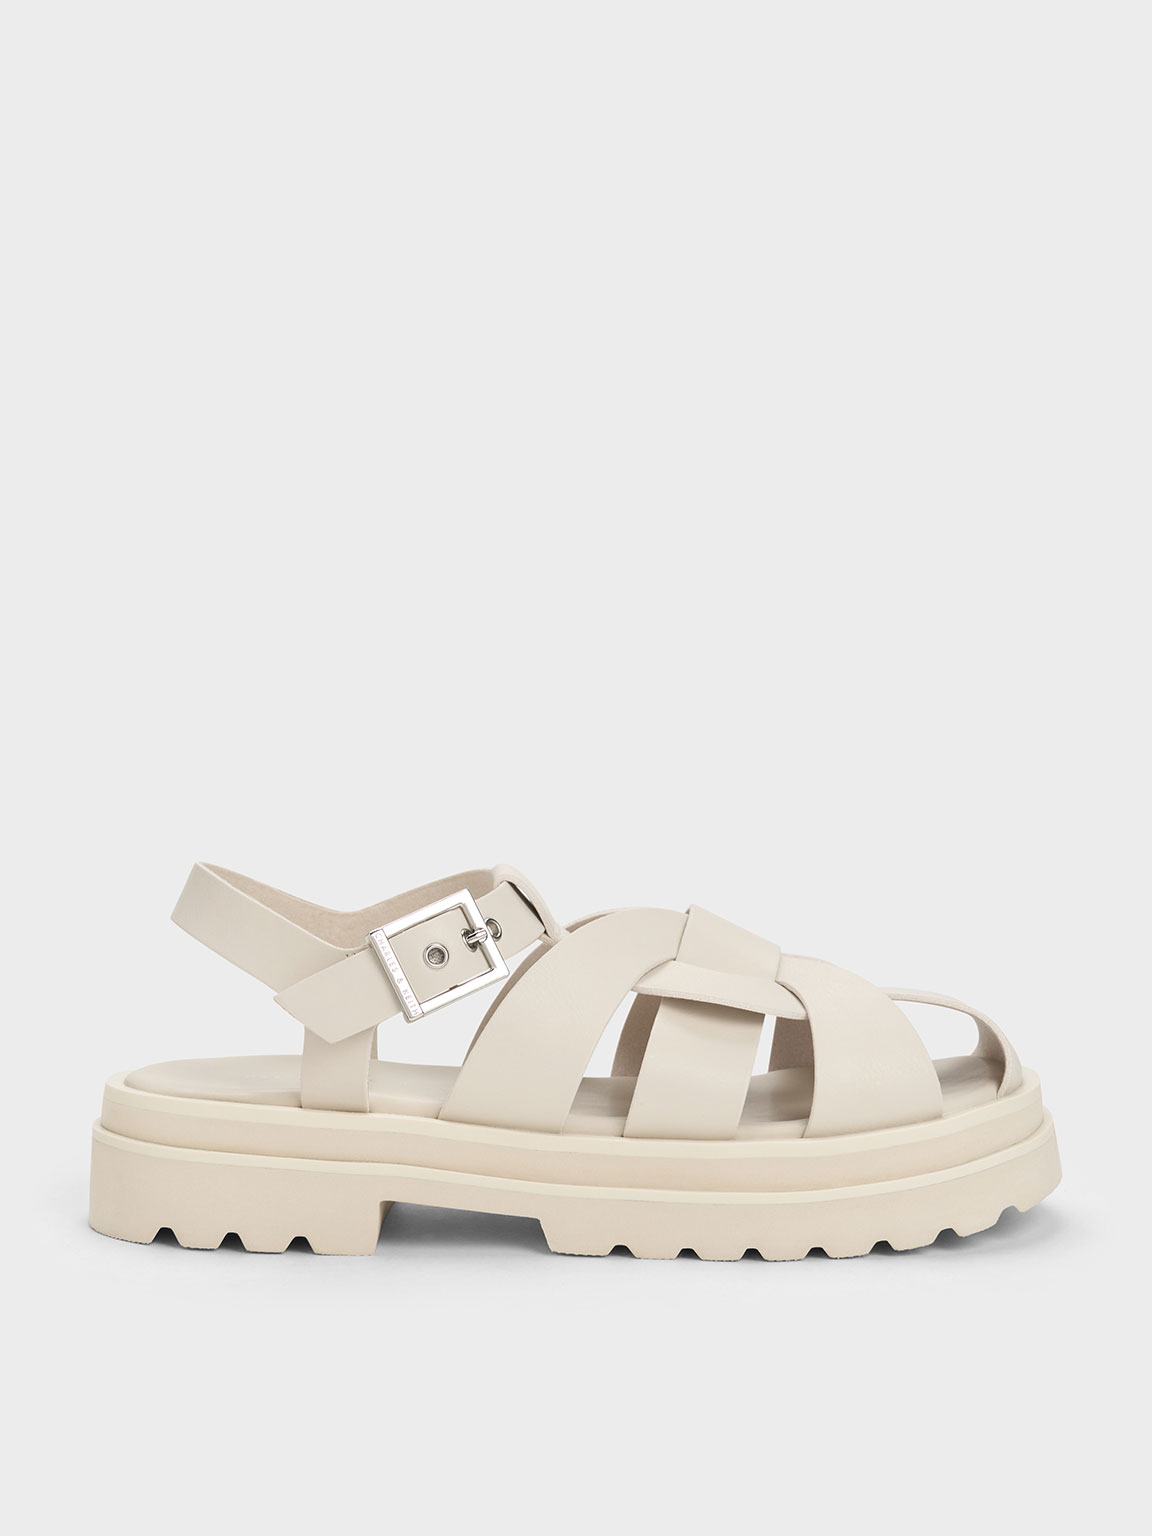 Charles & Keith Nell Gladiator Sandals In Chalk